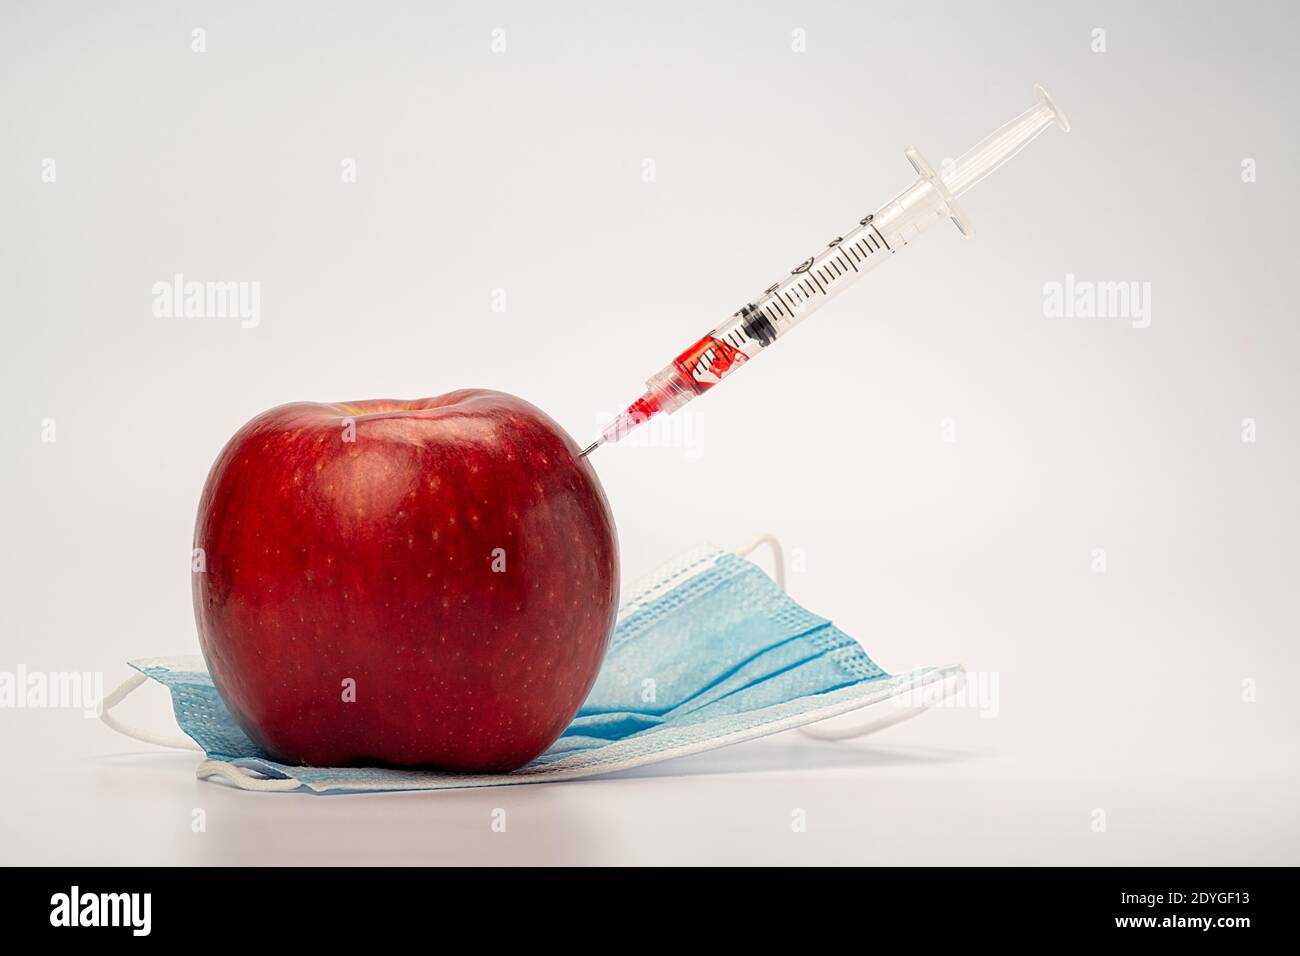 A syringe is injecting an apple, symbolic of vaccination and medical treatment Stock Photo